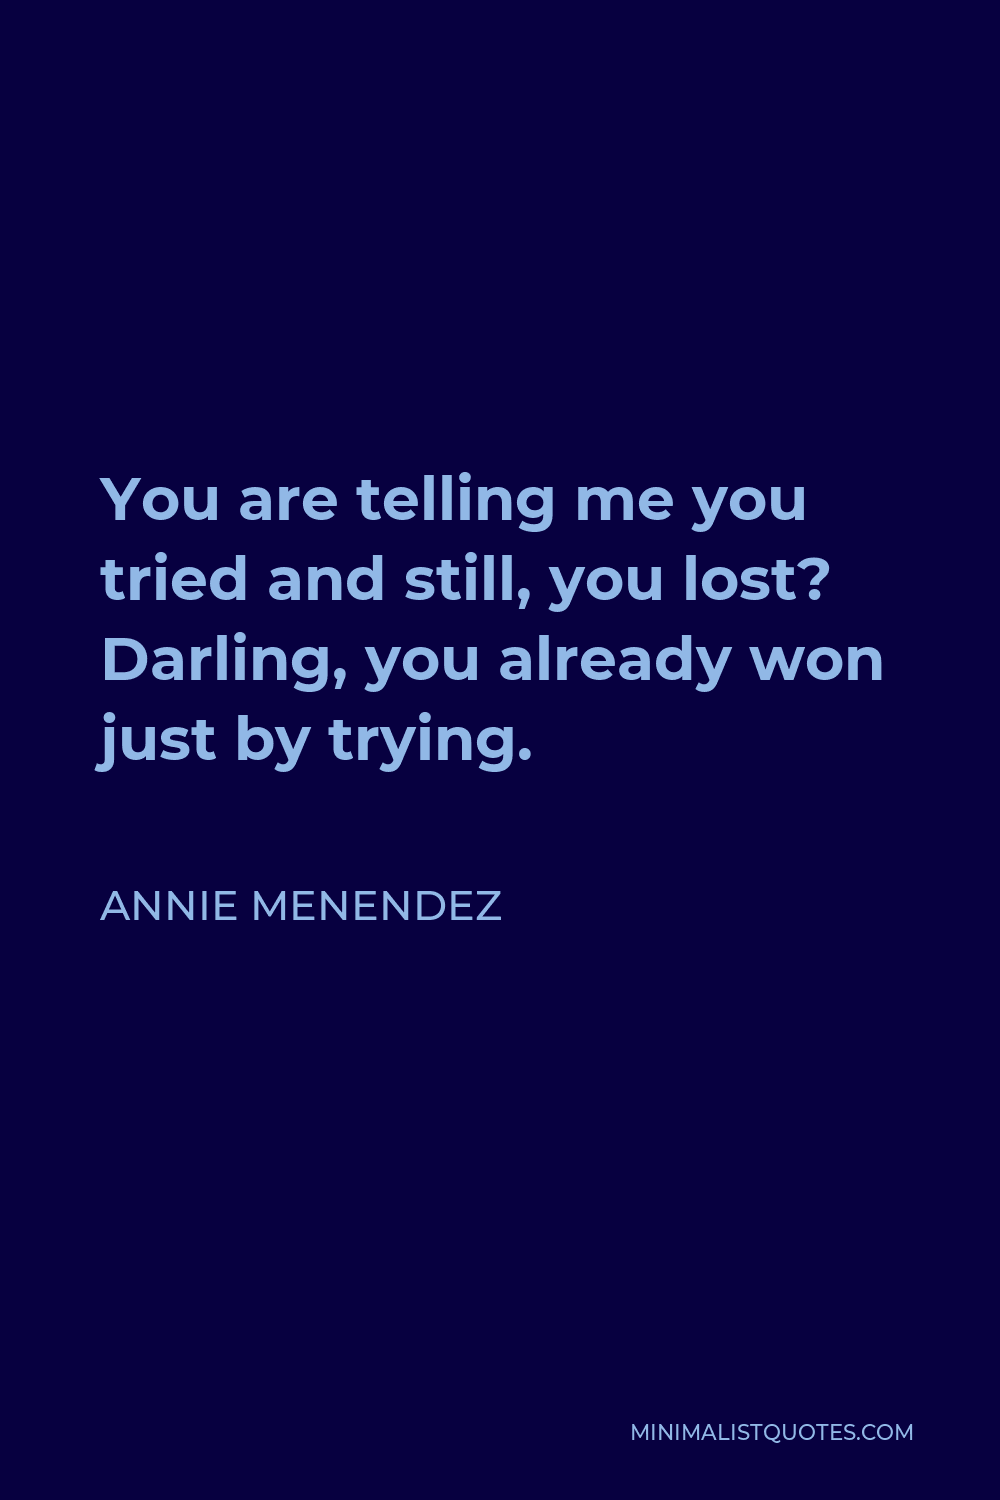 Annie Menendez Quote - You are telling me you tried and still, you lost? Darling, you already won just by trying.